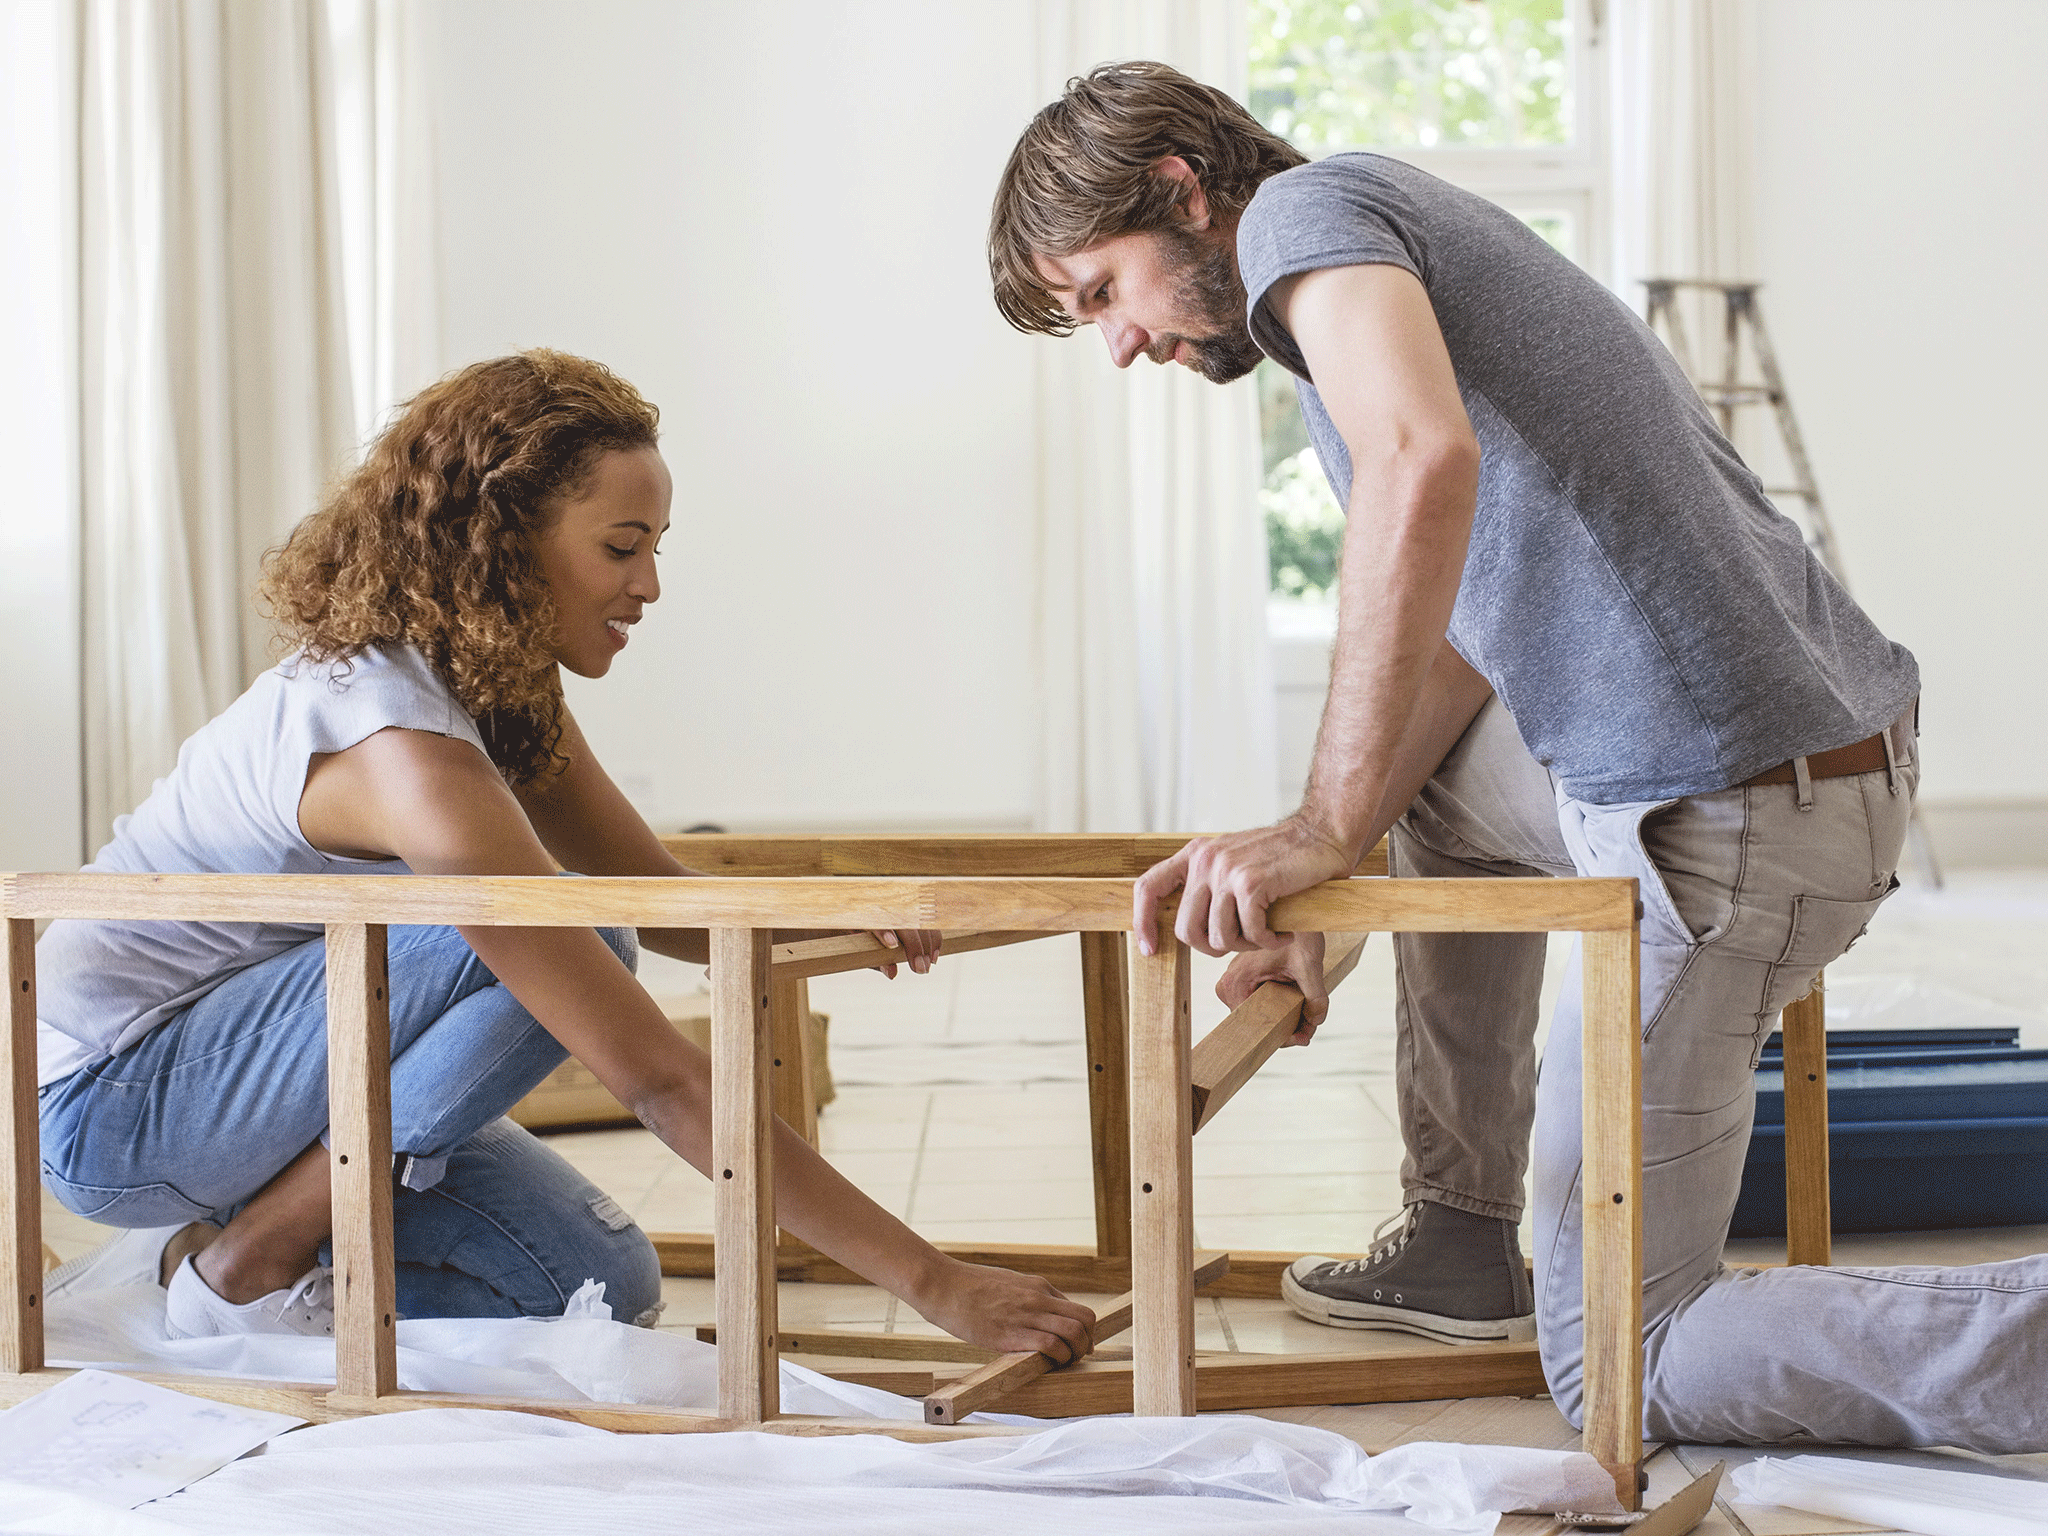 Women took one minute longer than men to assemble furniture with instructions, according to a test conducted by a Norwegian university